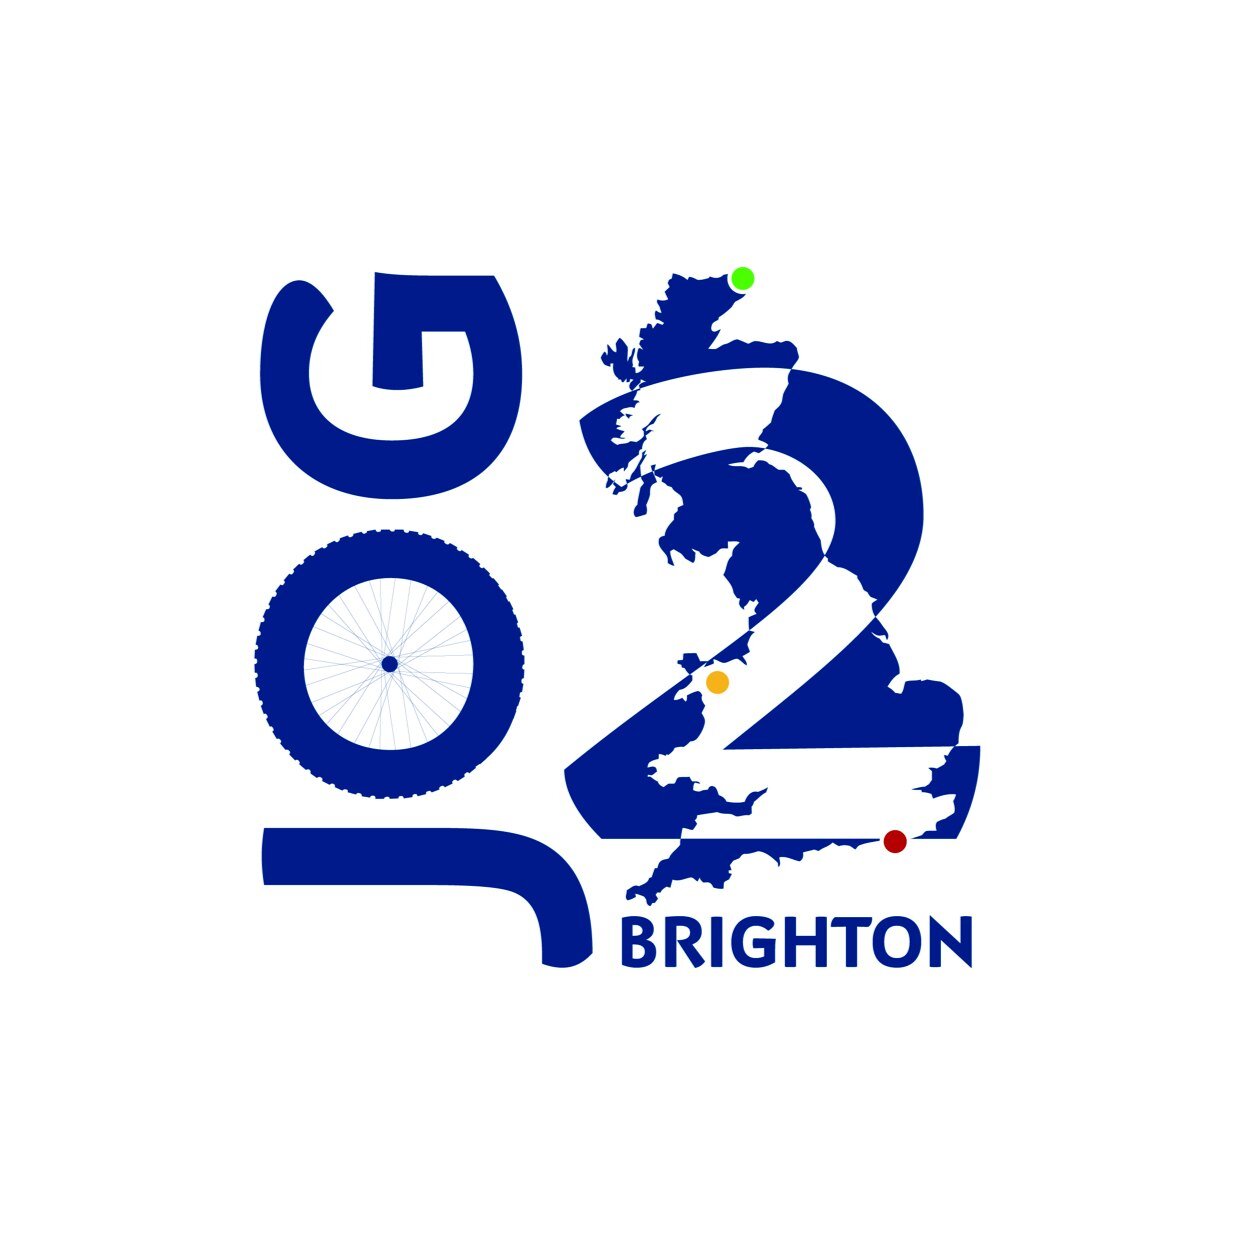 Brett & Rob are cycling, climbing and running their way from John O'Groats to Brighton via the 3 Peaks, ending with the Brighton Marathon all for charity!